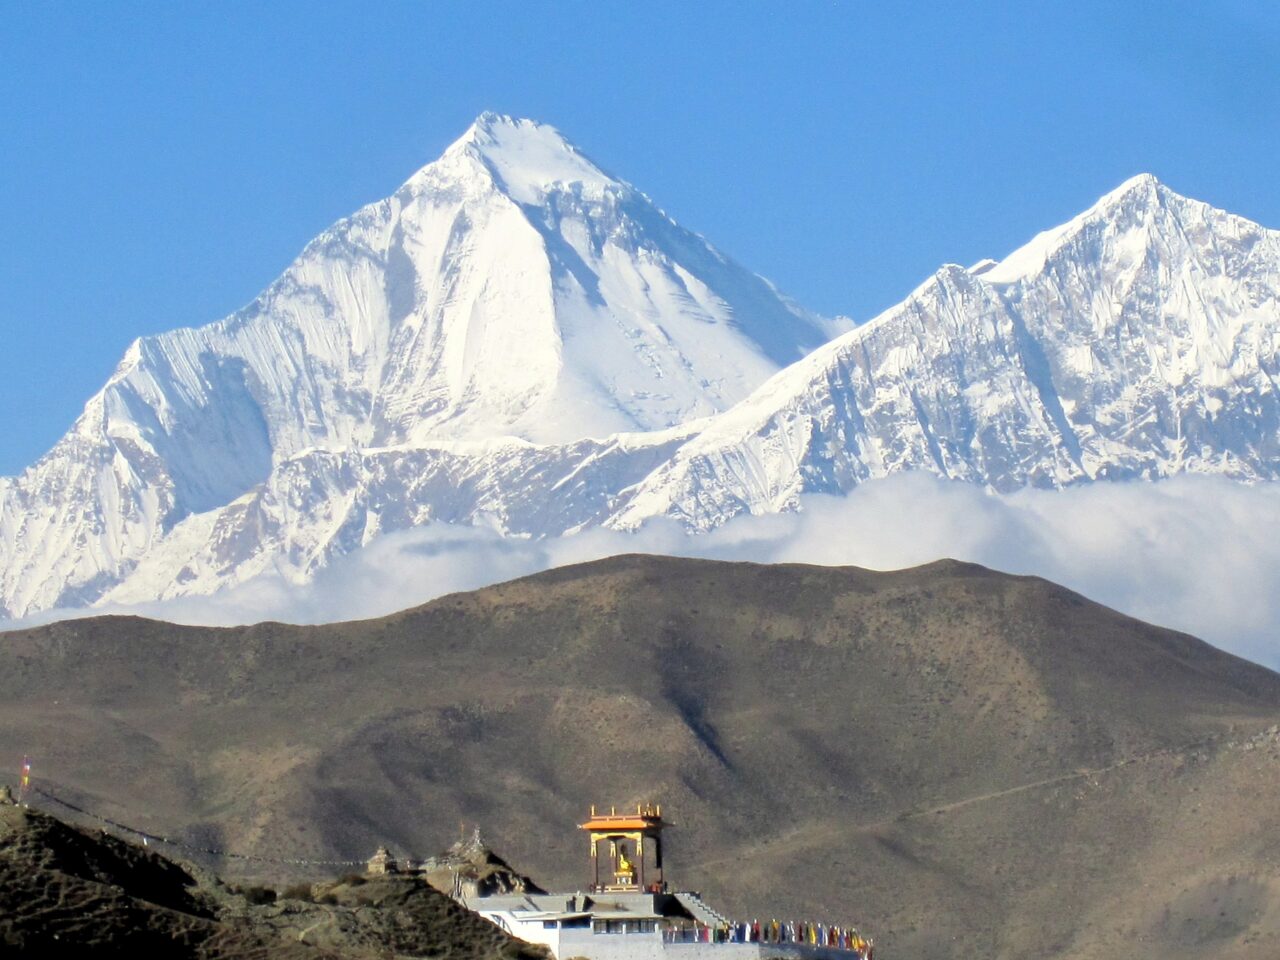 2560px Dhaulagiri mountain with monastery in the background